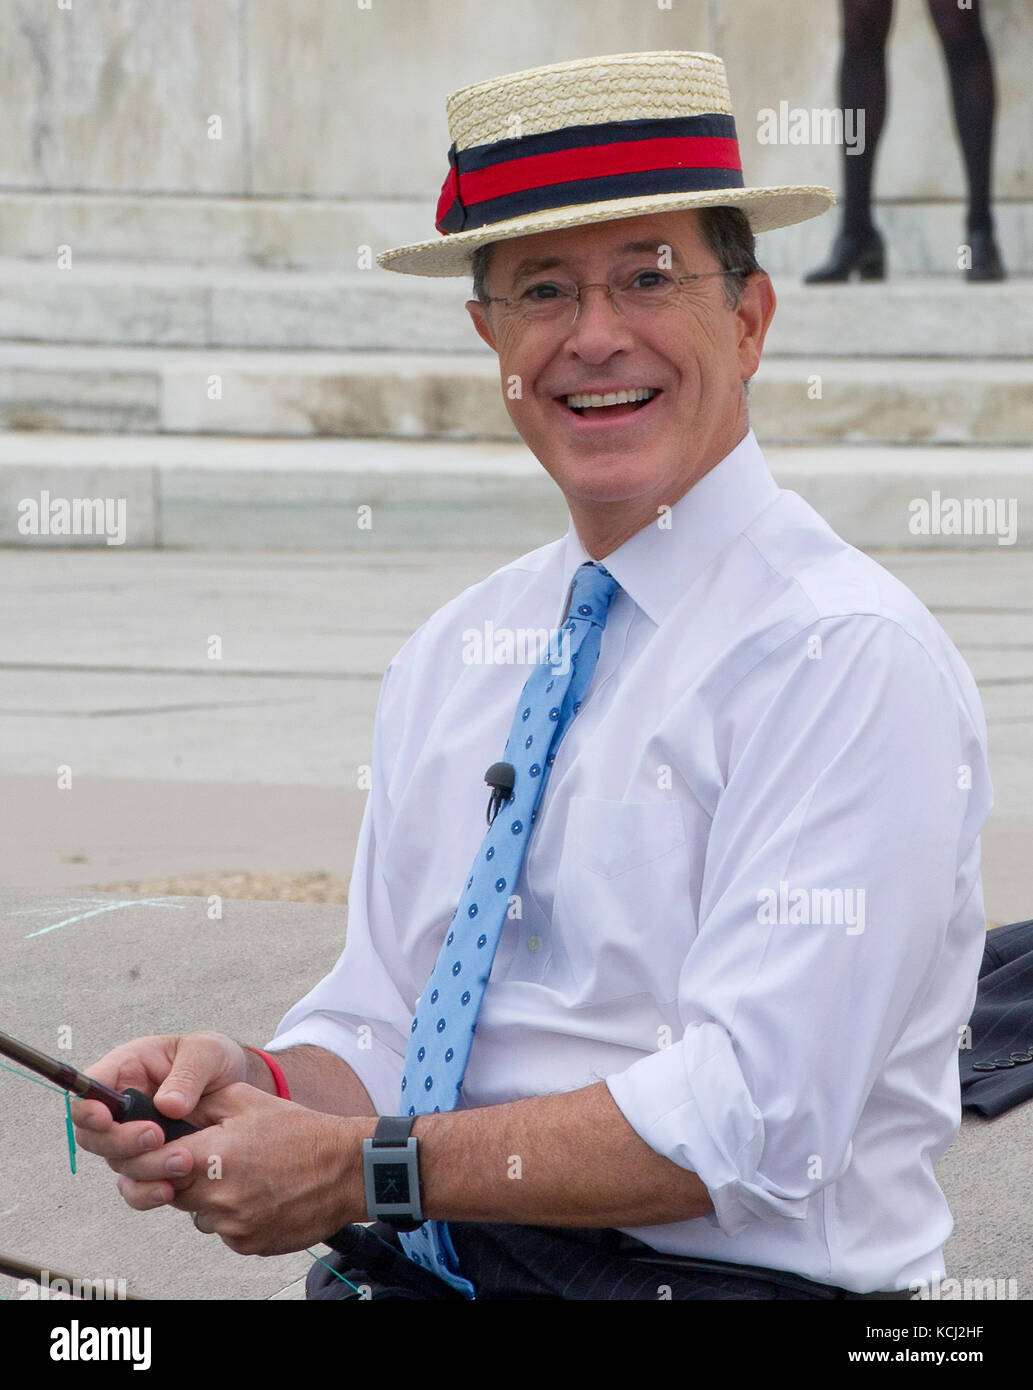 Stephen Colbert, host of the Comedy Central show 'The Colbert Report' works on a bit around the the U.S. Capitol Reflecting Pool in Washington, D.C. on Friday, October 3, 2014. Credit: Ron Sachs / CNP (RESTRICTION: NO New York or New Jersey Newspapers or newspapers within a 75 mile radius of New York City) /MediaPunch Stock Photo